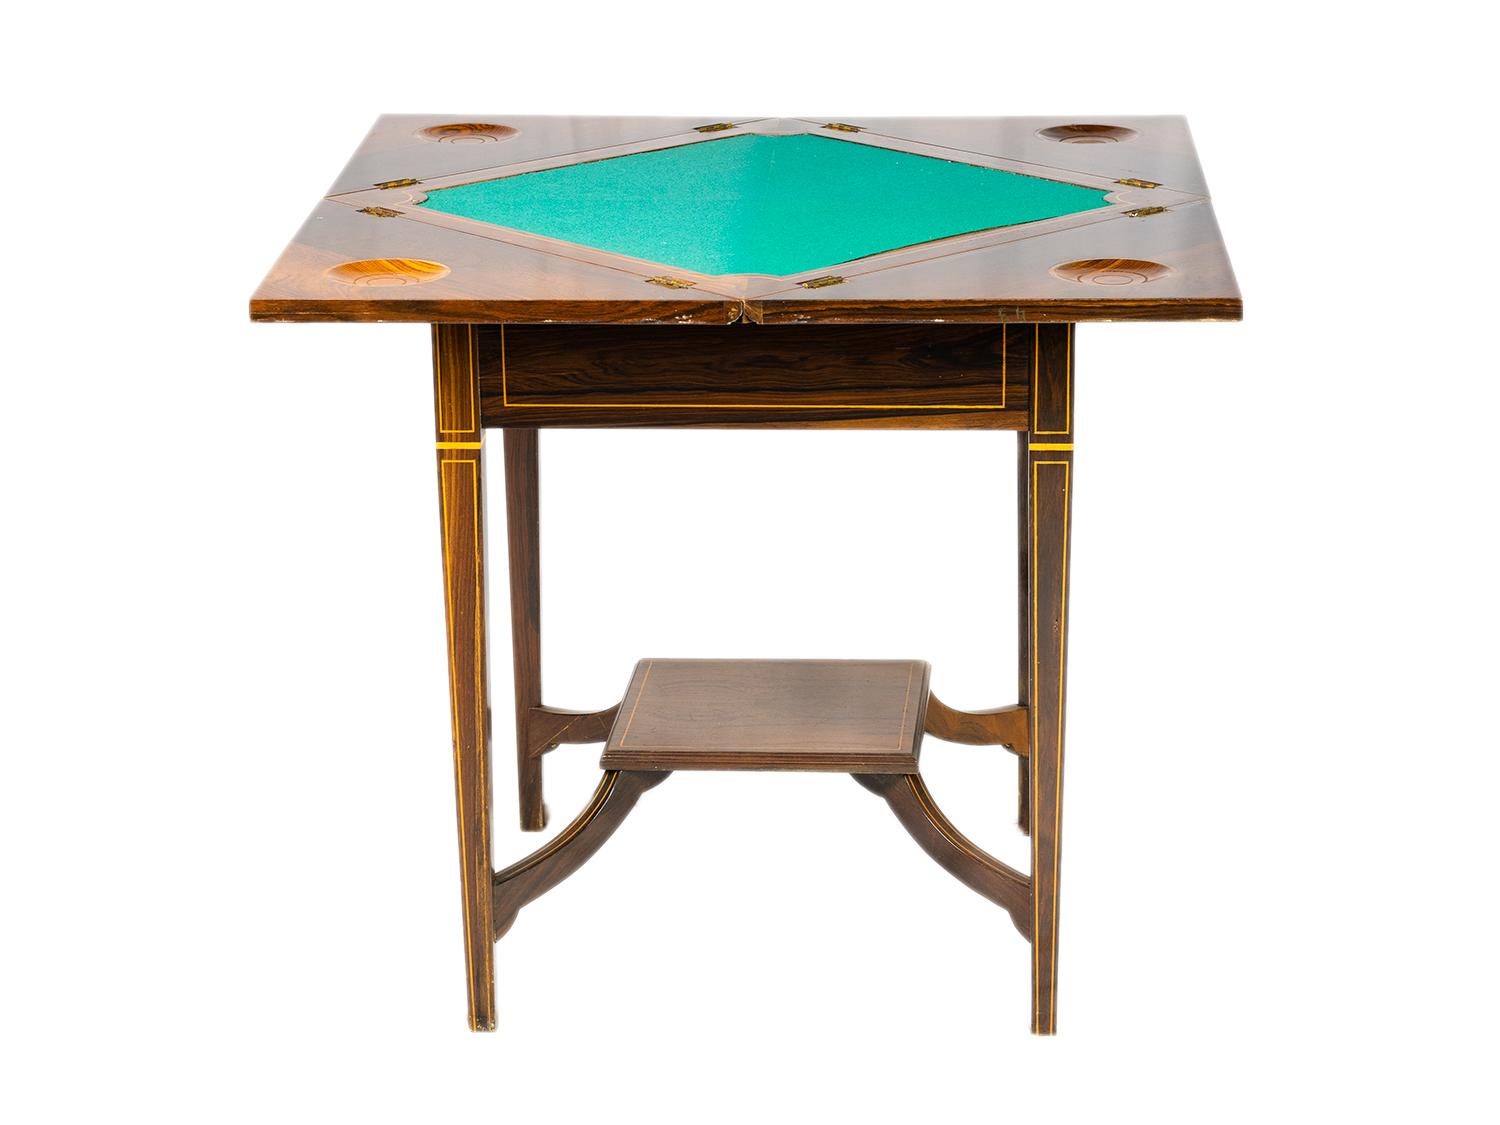 Wood Tigerwood Victorian Handkerchief Table, 19th Century For Sale